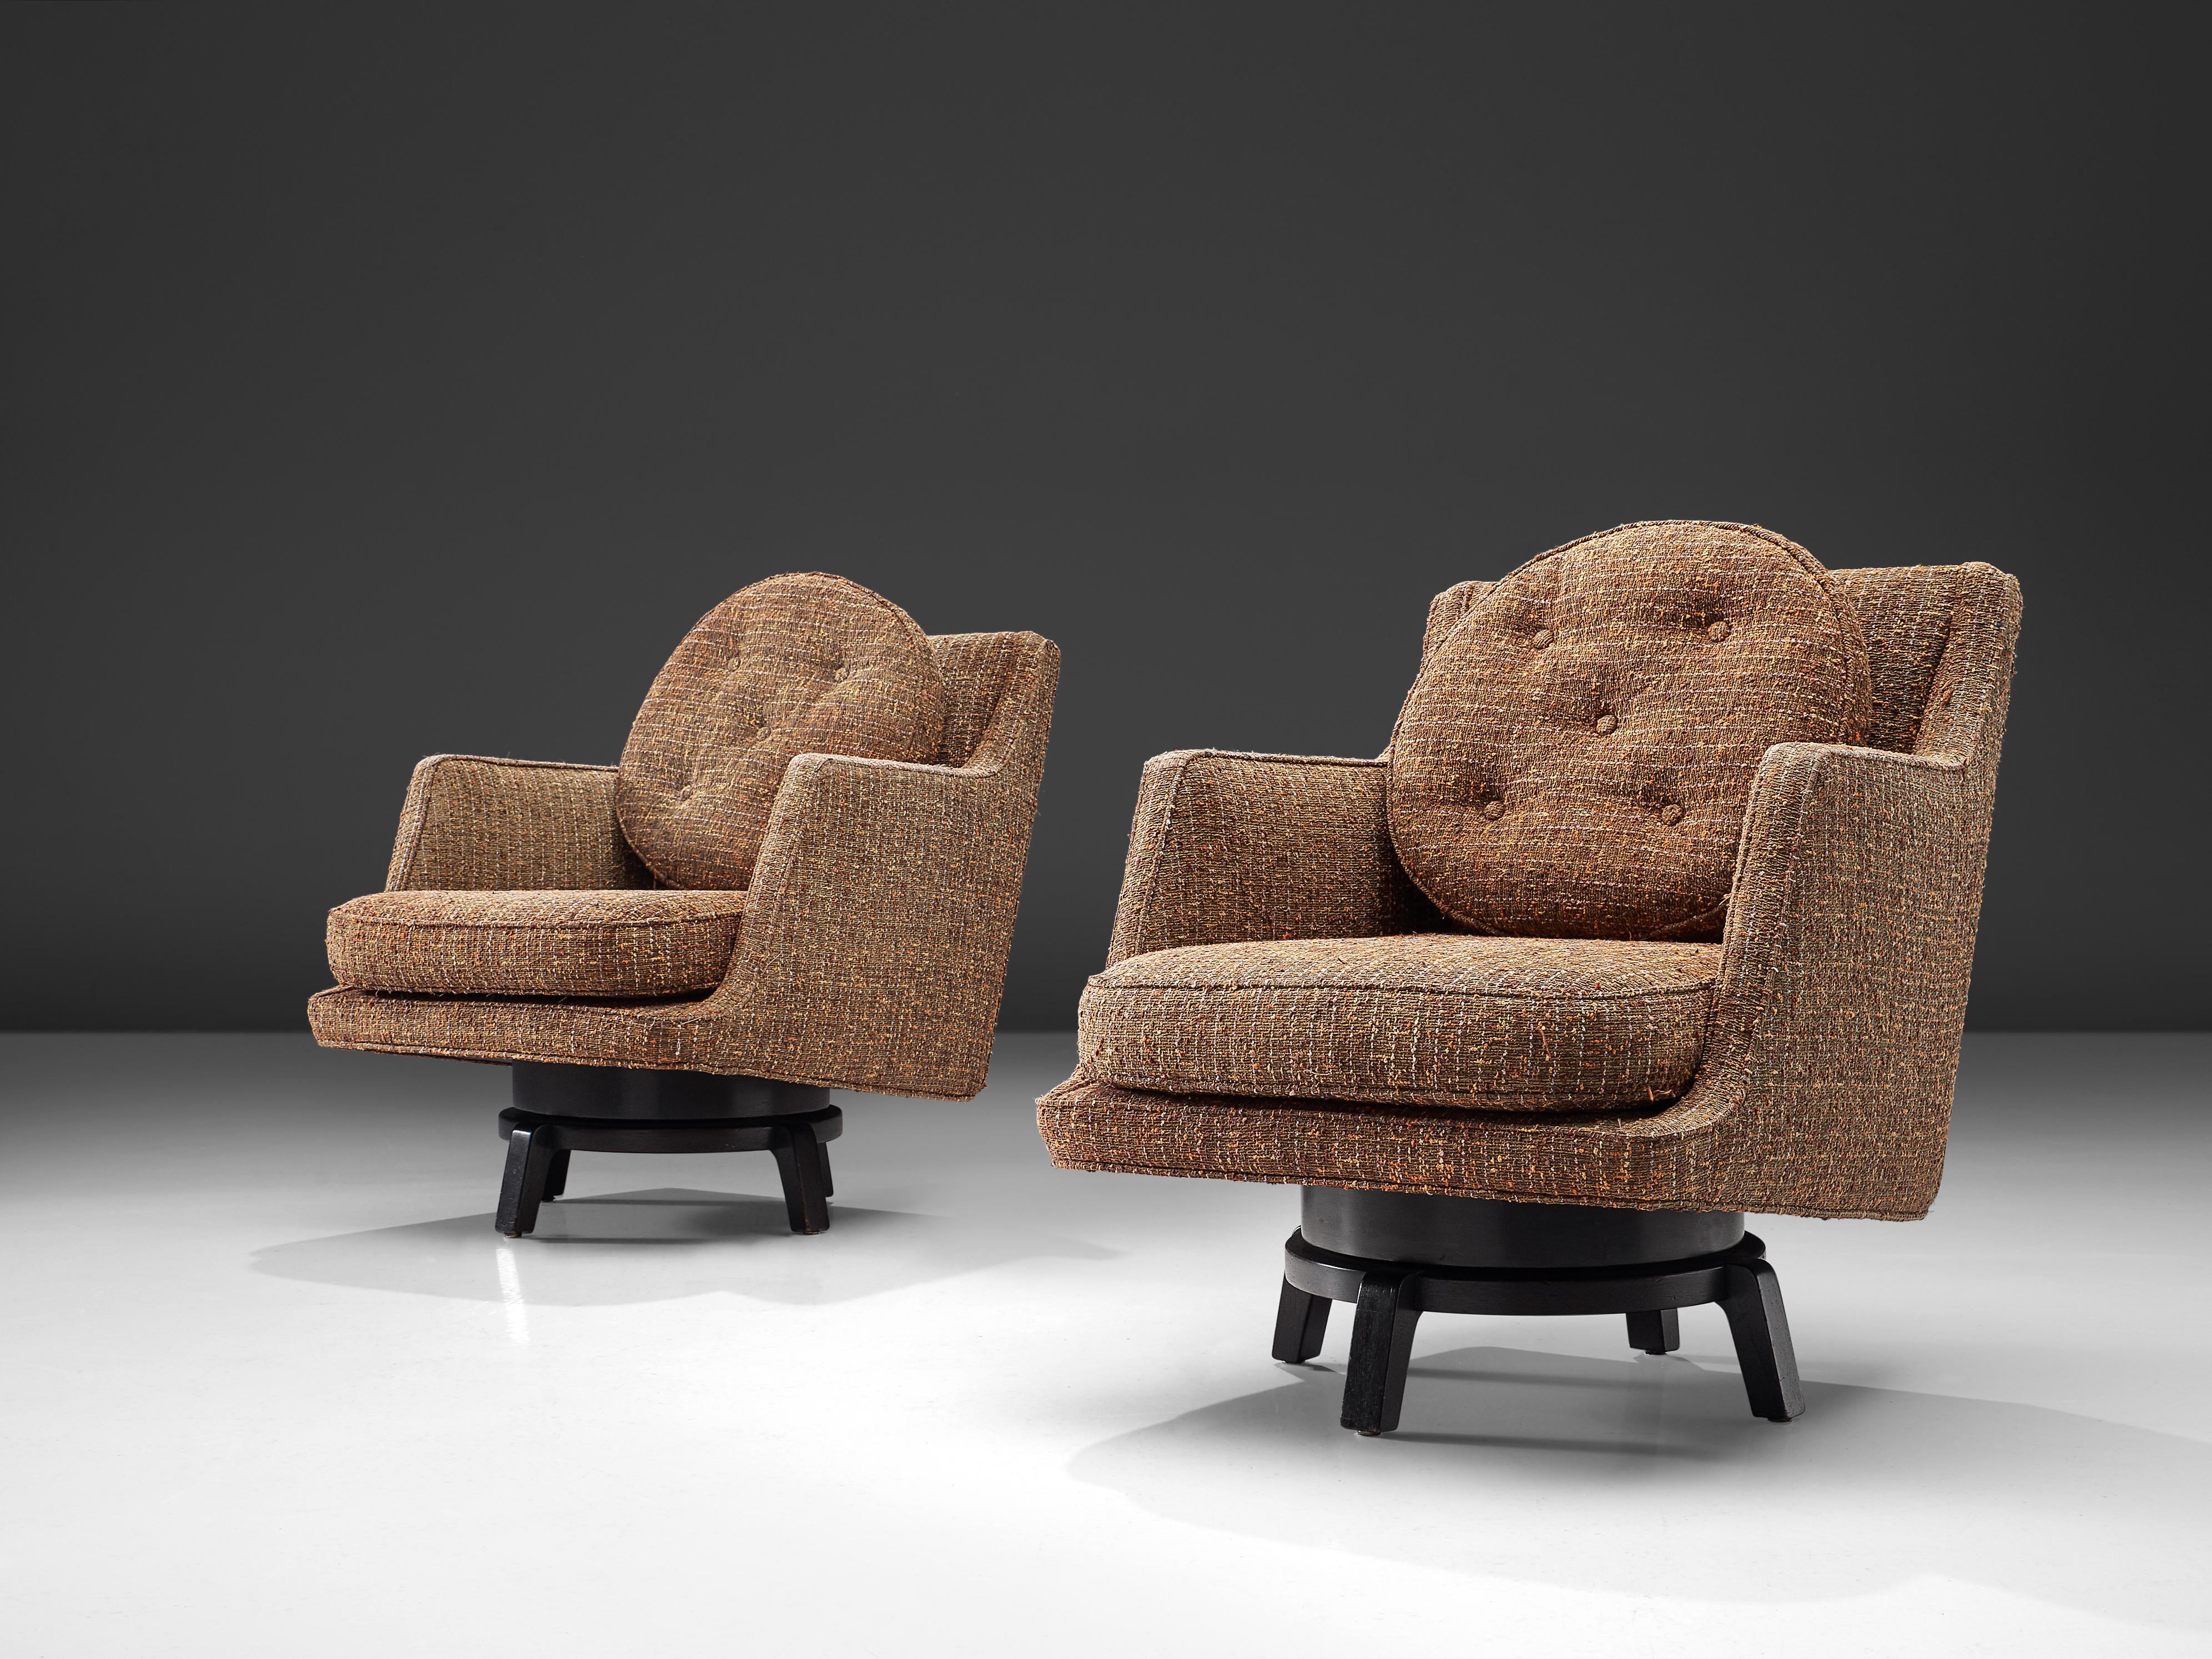 20th Century Edward Wormley Swivel Chairs Model '5609' in Mahogany and Fabric Upholstery